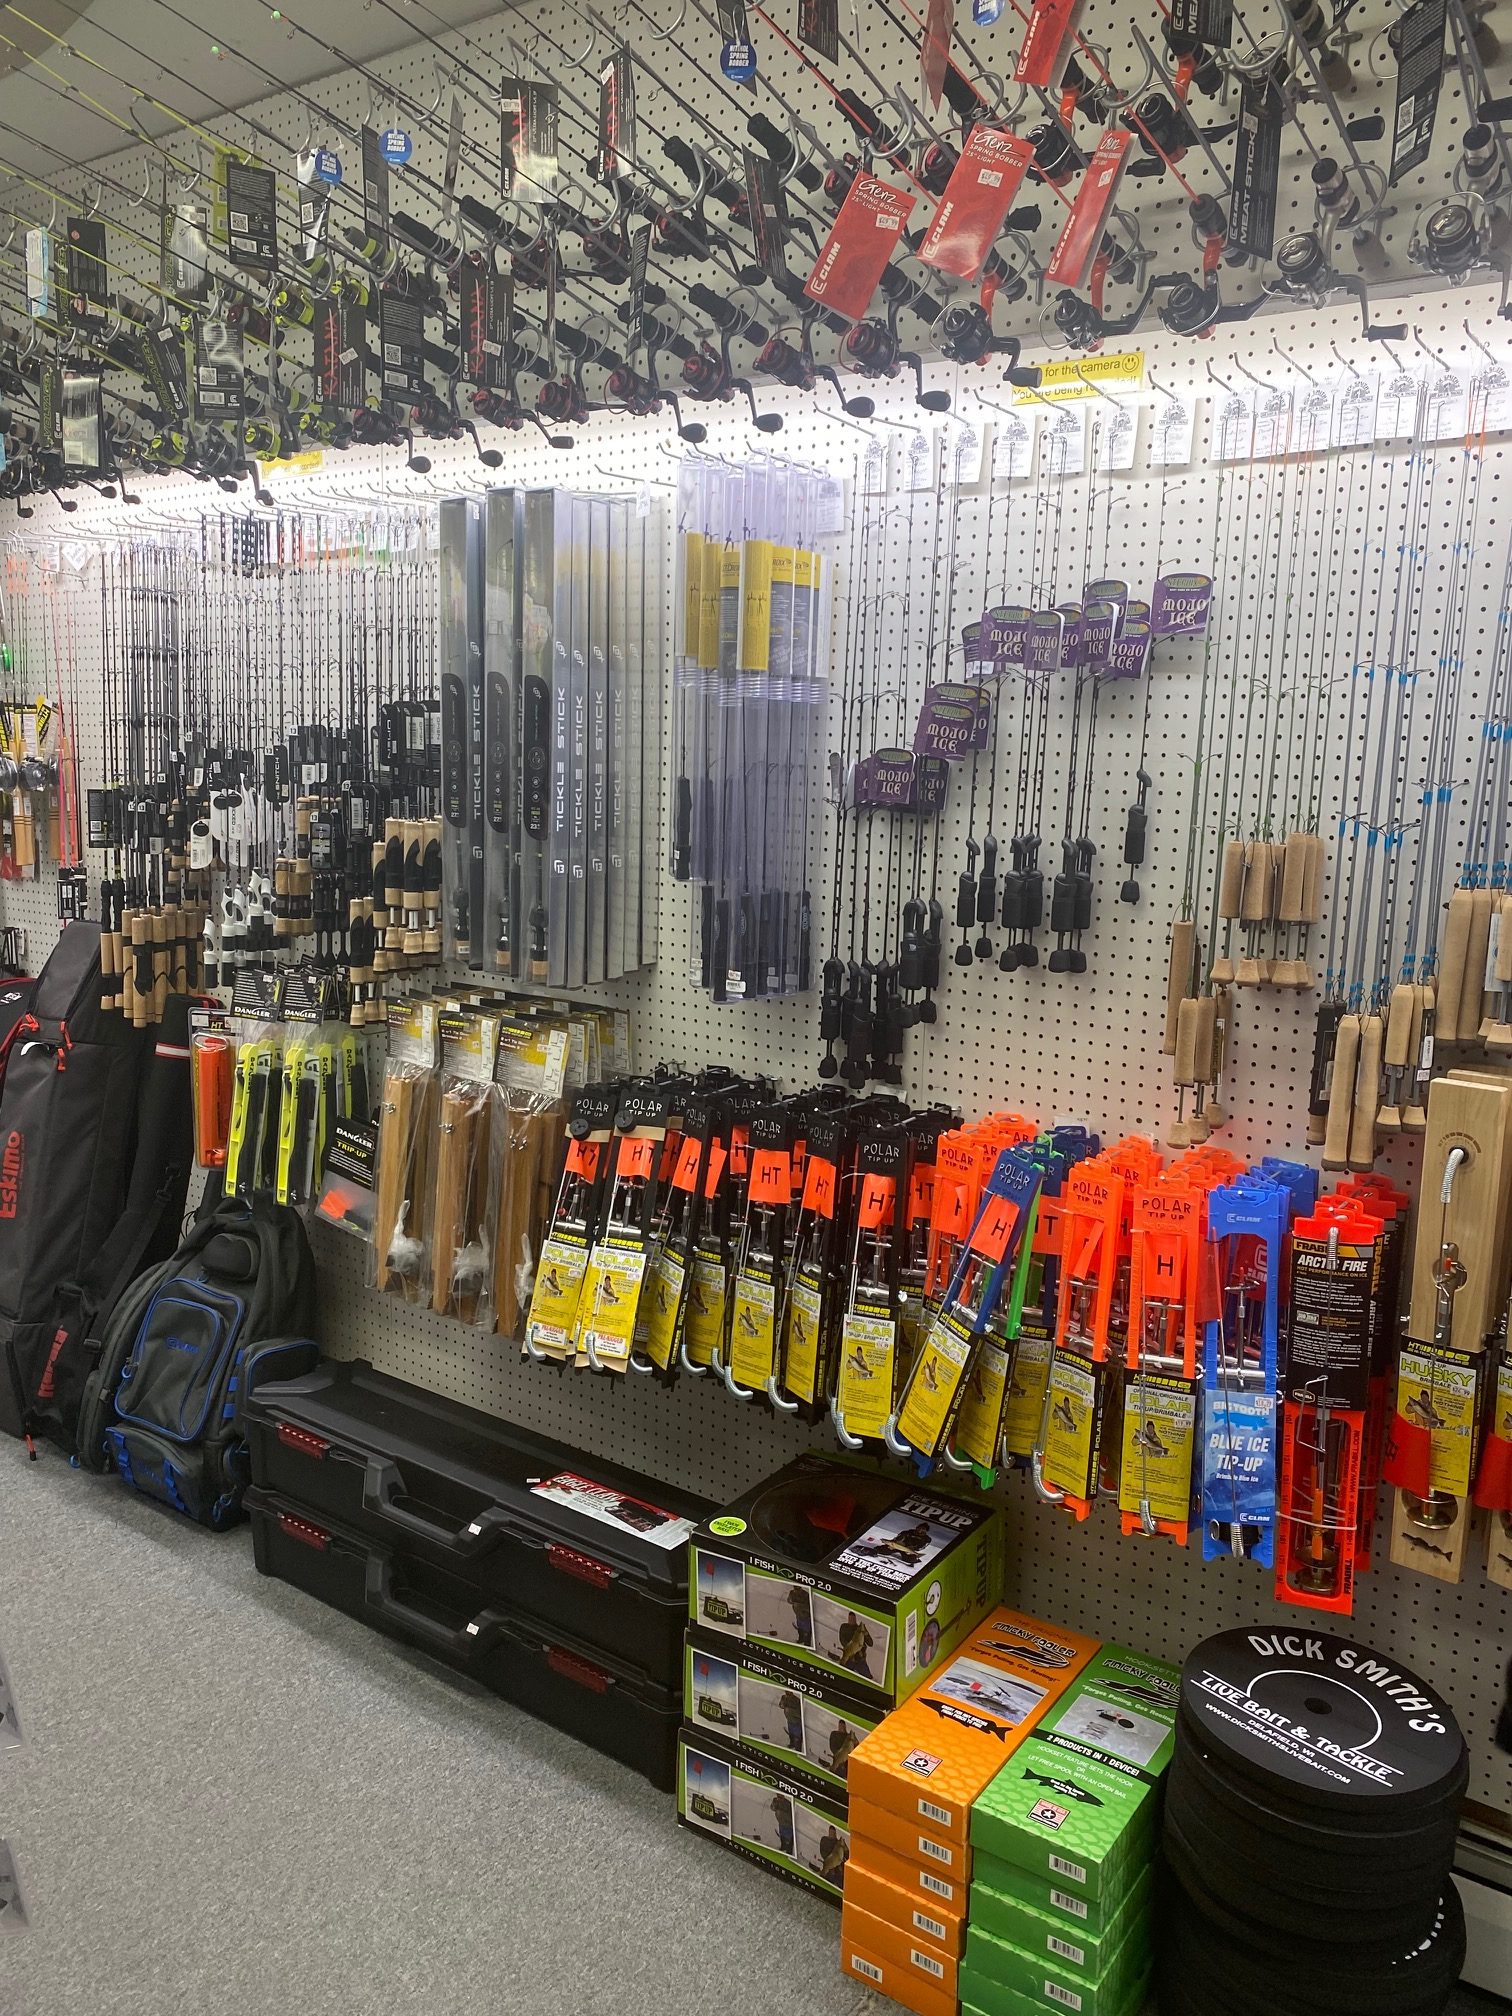 Ice Rods, Tip-Ups, Rod Cases - Dick Smith's Live Bait & Tackle